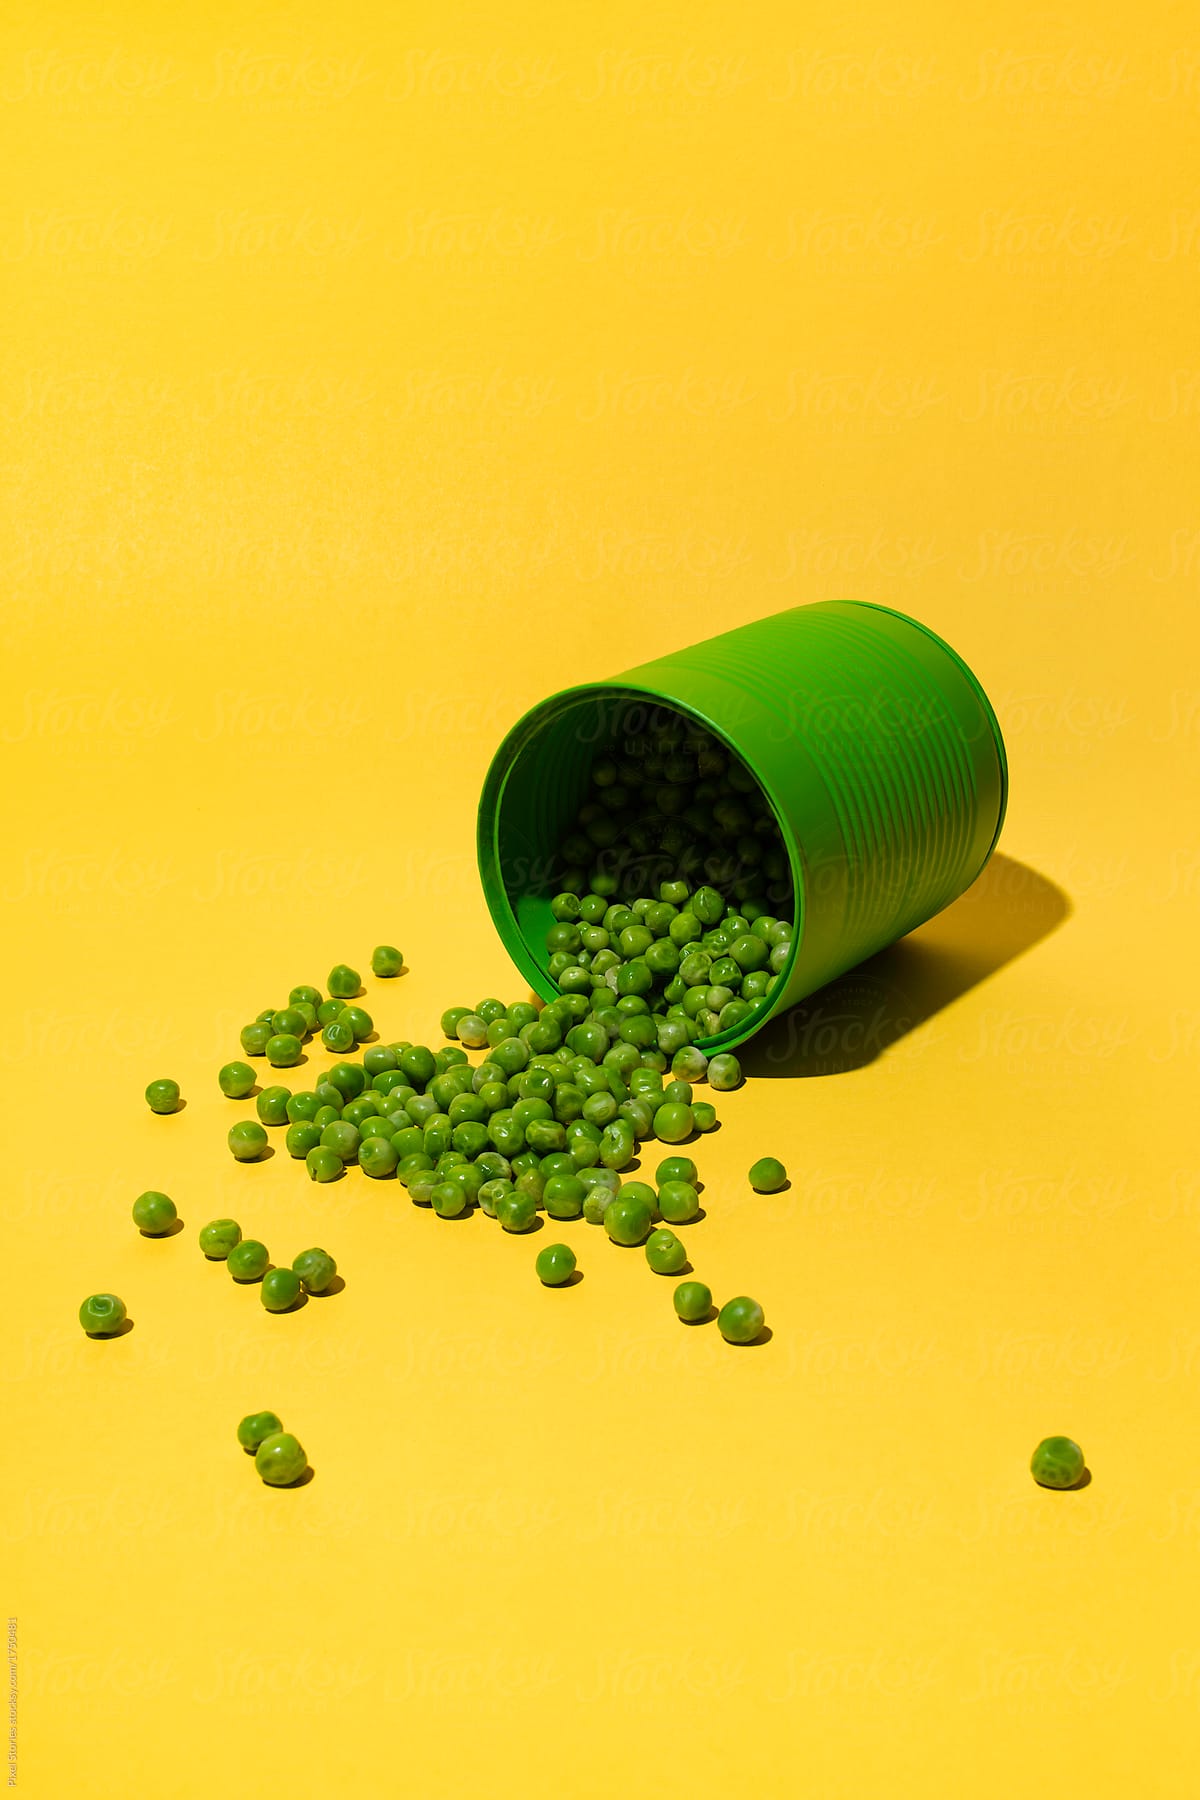 Canned peas on yellow background